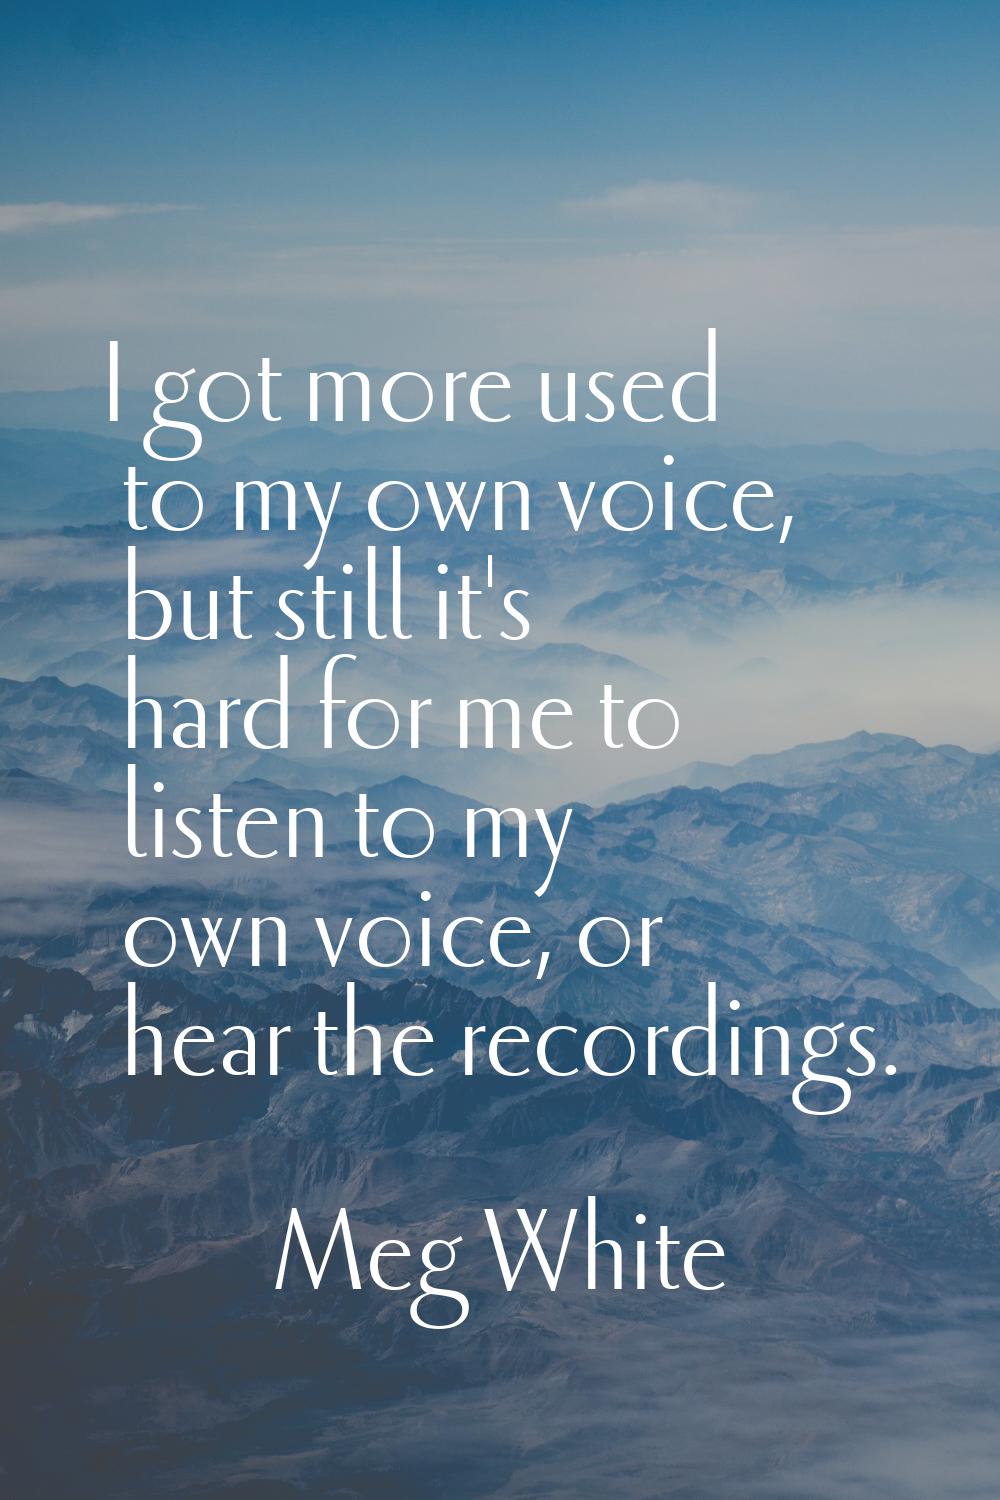 I got more used to my own voice, but still it's hard for me to listen to my own voice, or hear the 